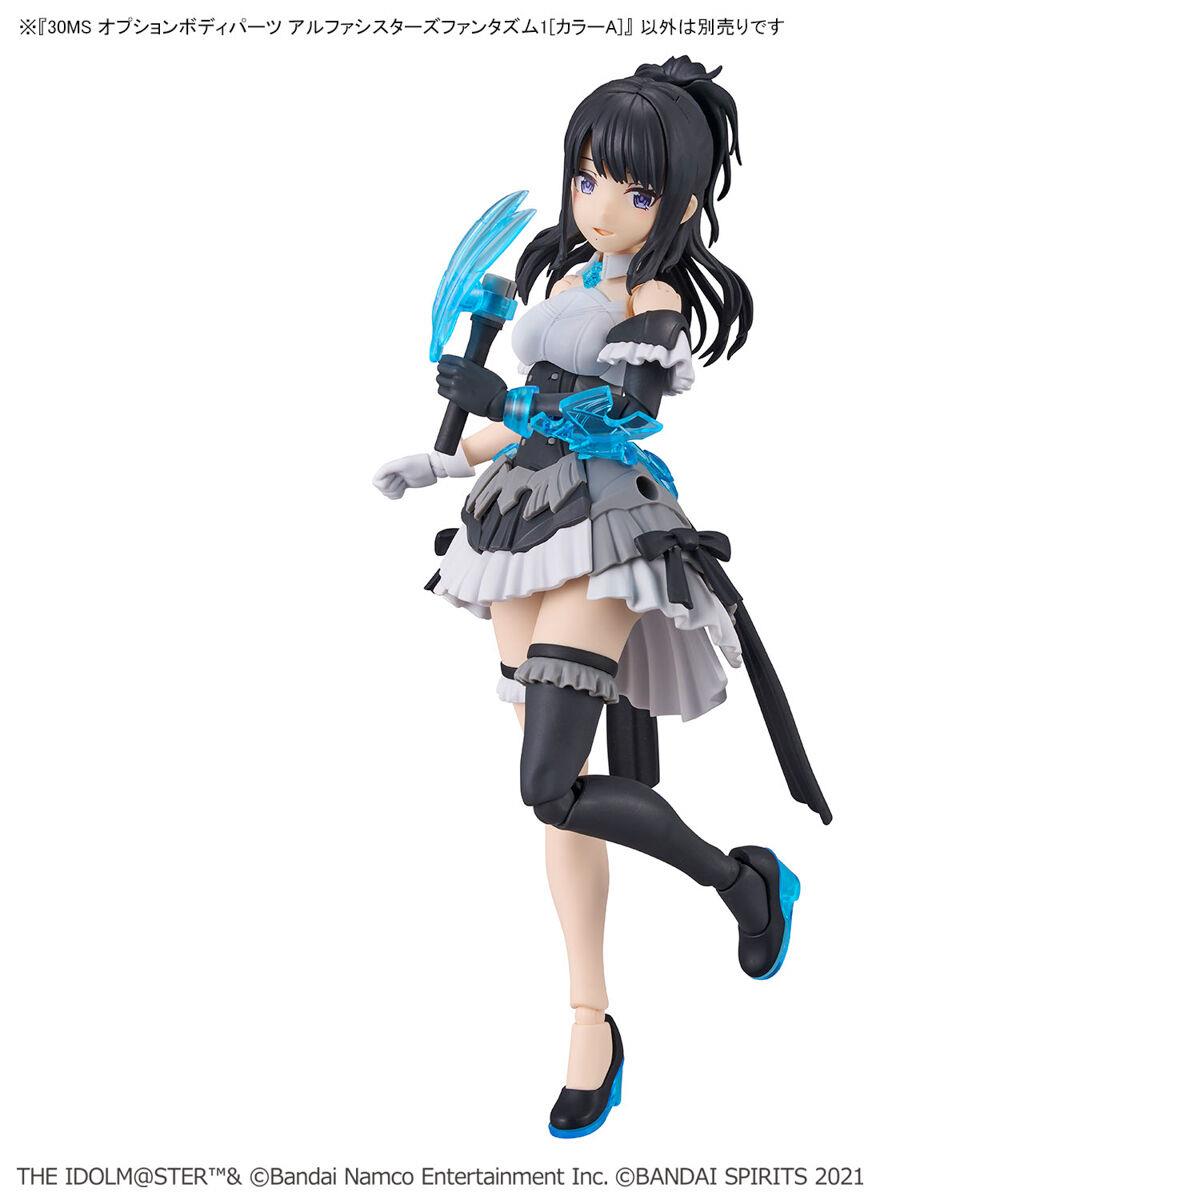 30 Minutes Sisters x Idolm@ster: Alpha Sisters Phantasm 1 (Colour A) Model Option Pack